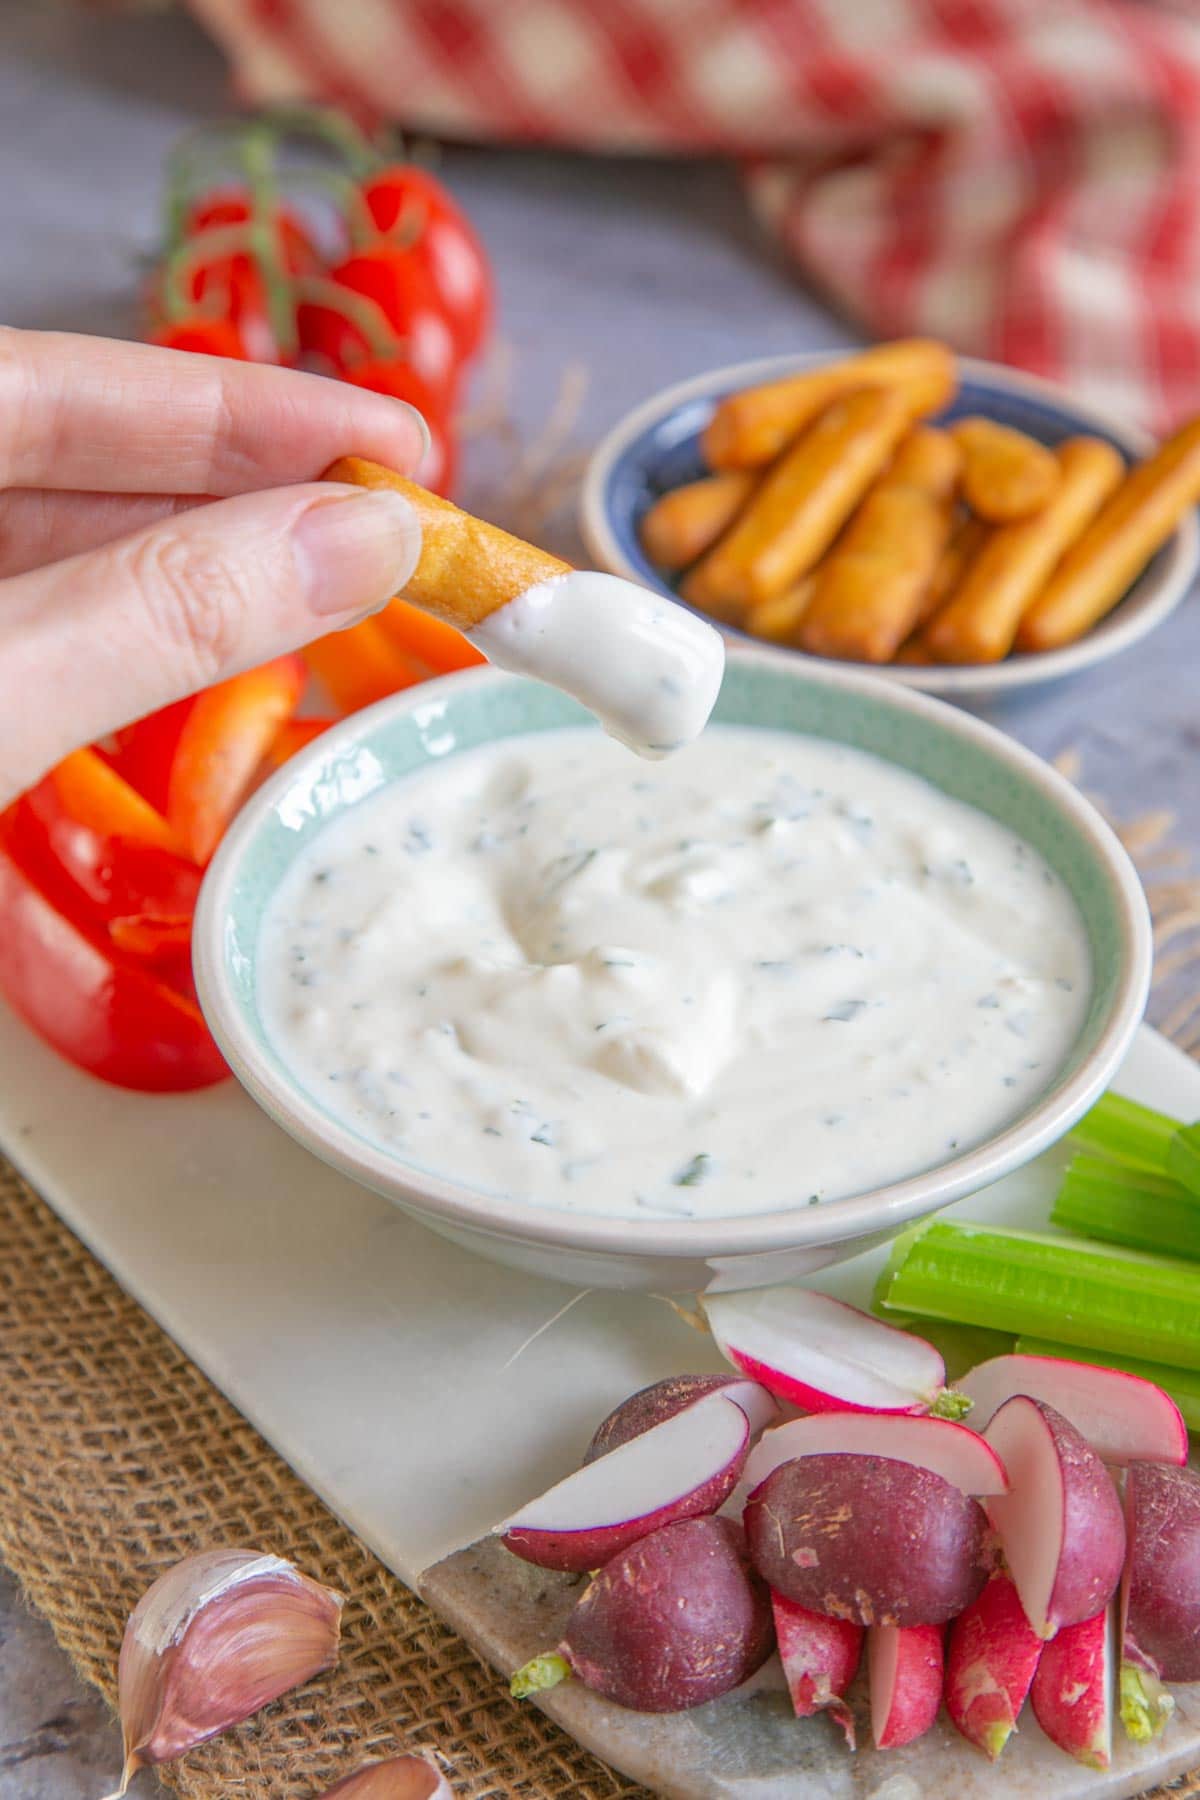 Garlic and onion dip with savoury snacks and crudités - perfect for parties and lazy nights in.